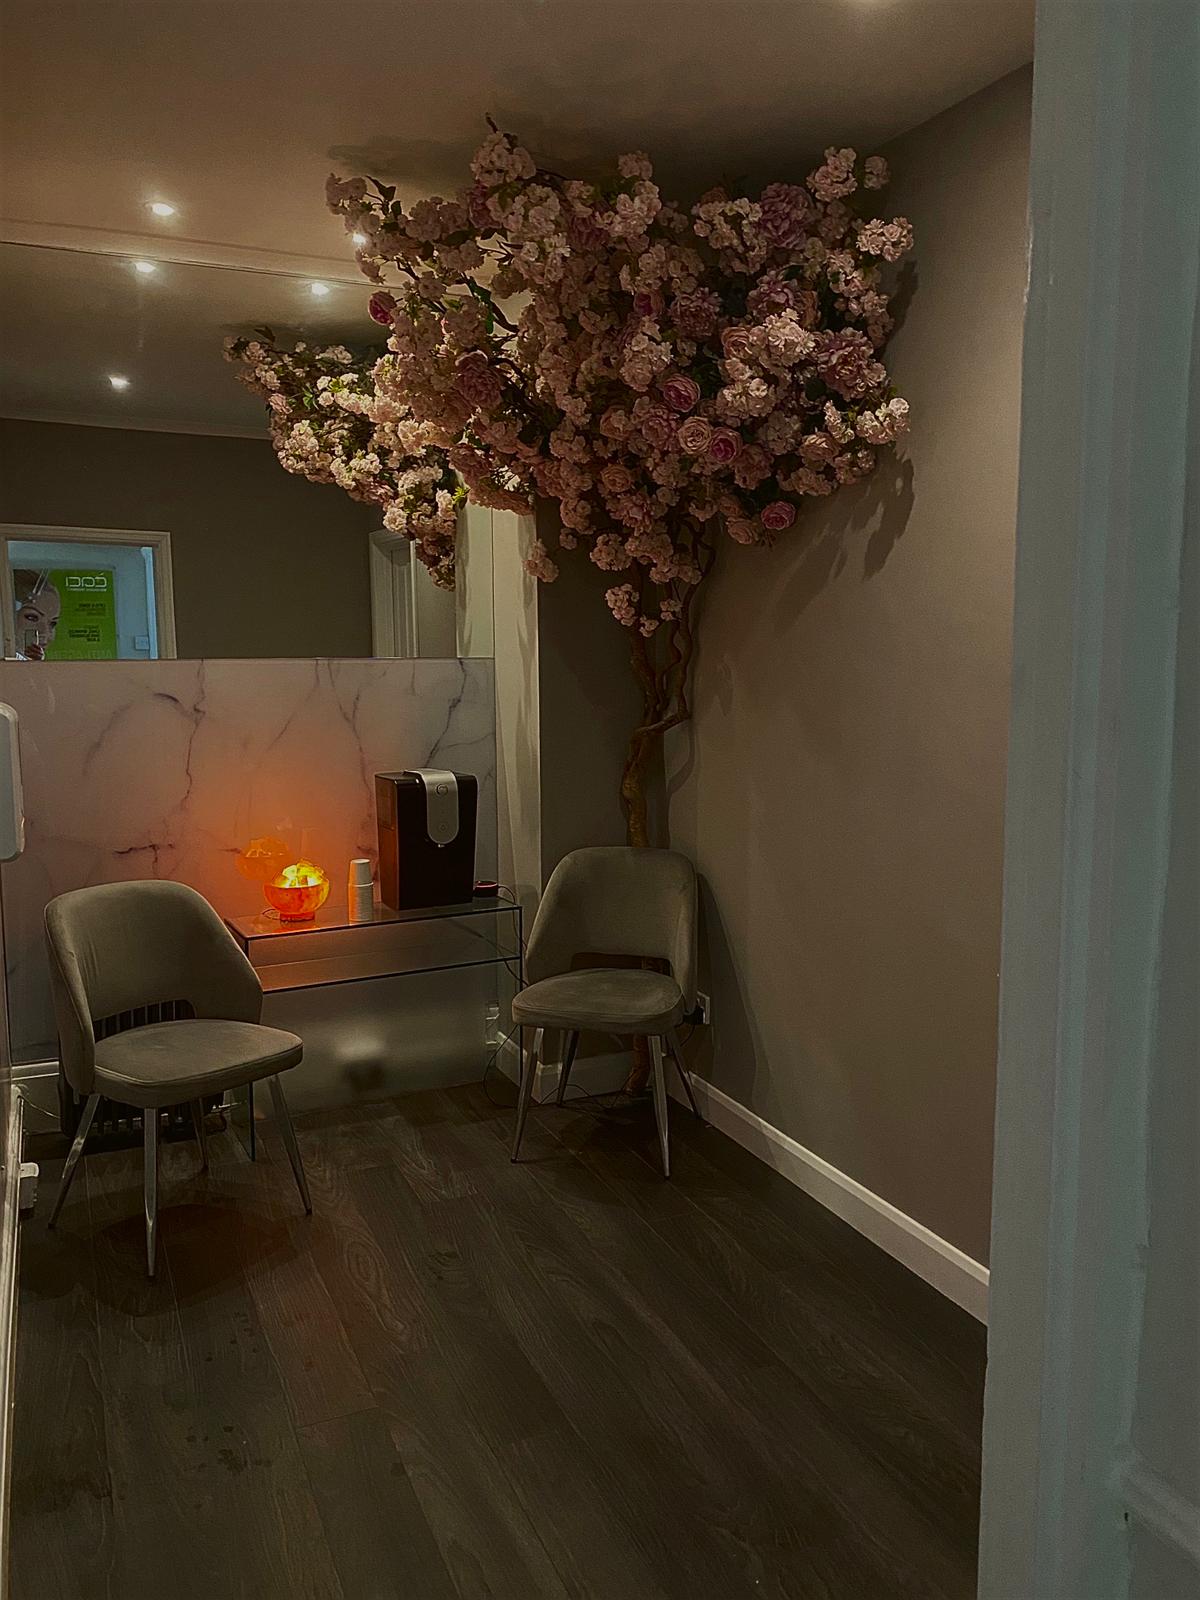 View of the upstairs relaxation rooms at The Hair and Beauty Rooms in Chilsehurst